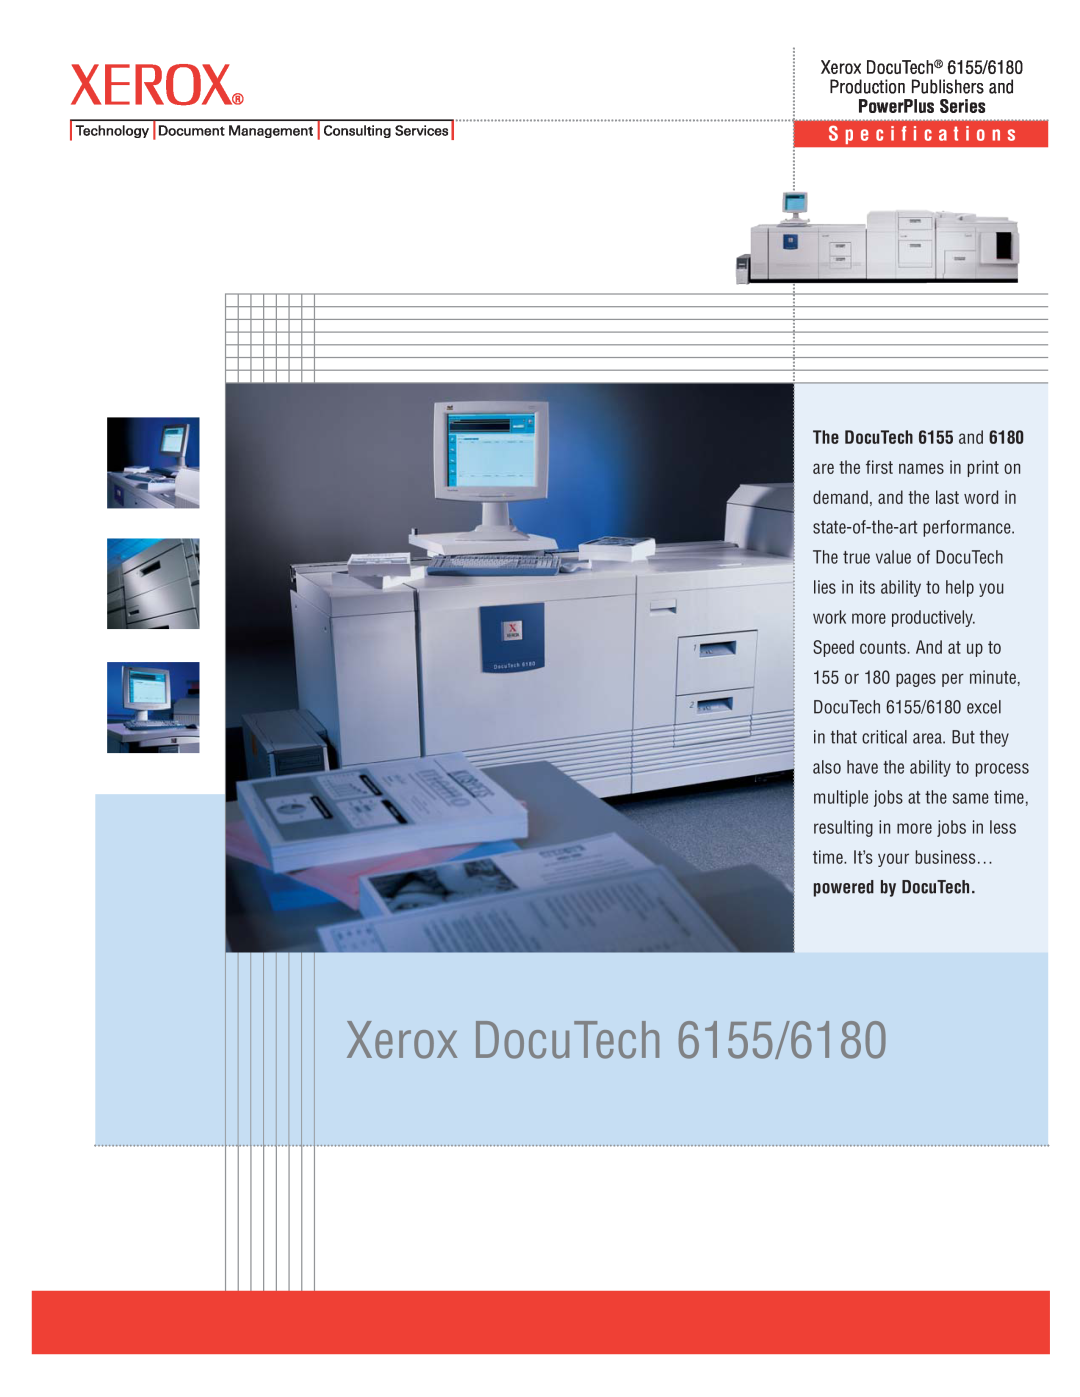 Xerox specifications Xerox DocuTech 6155/6180, S p e c i f i c a t i o n s, Production Publishers and, PowerPlus Series 